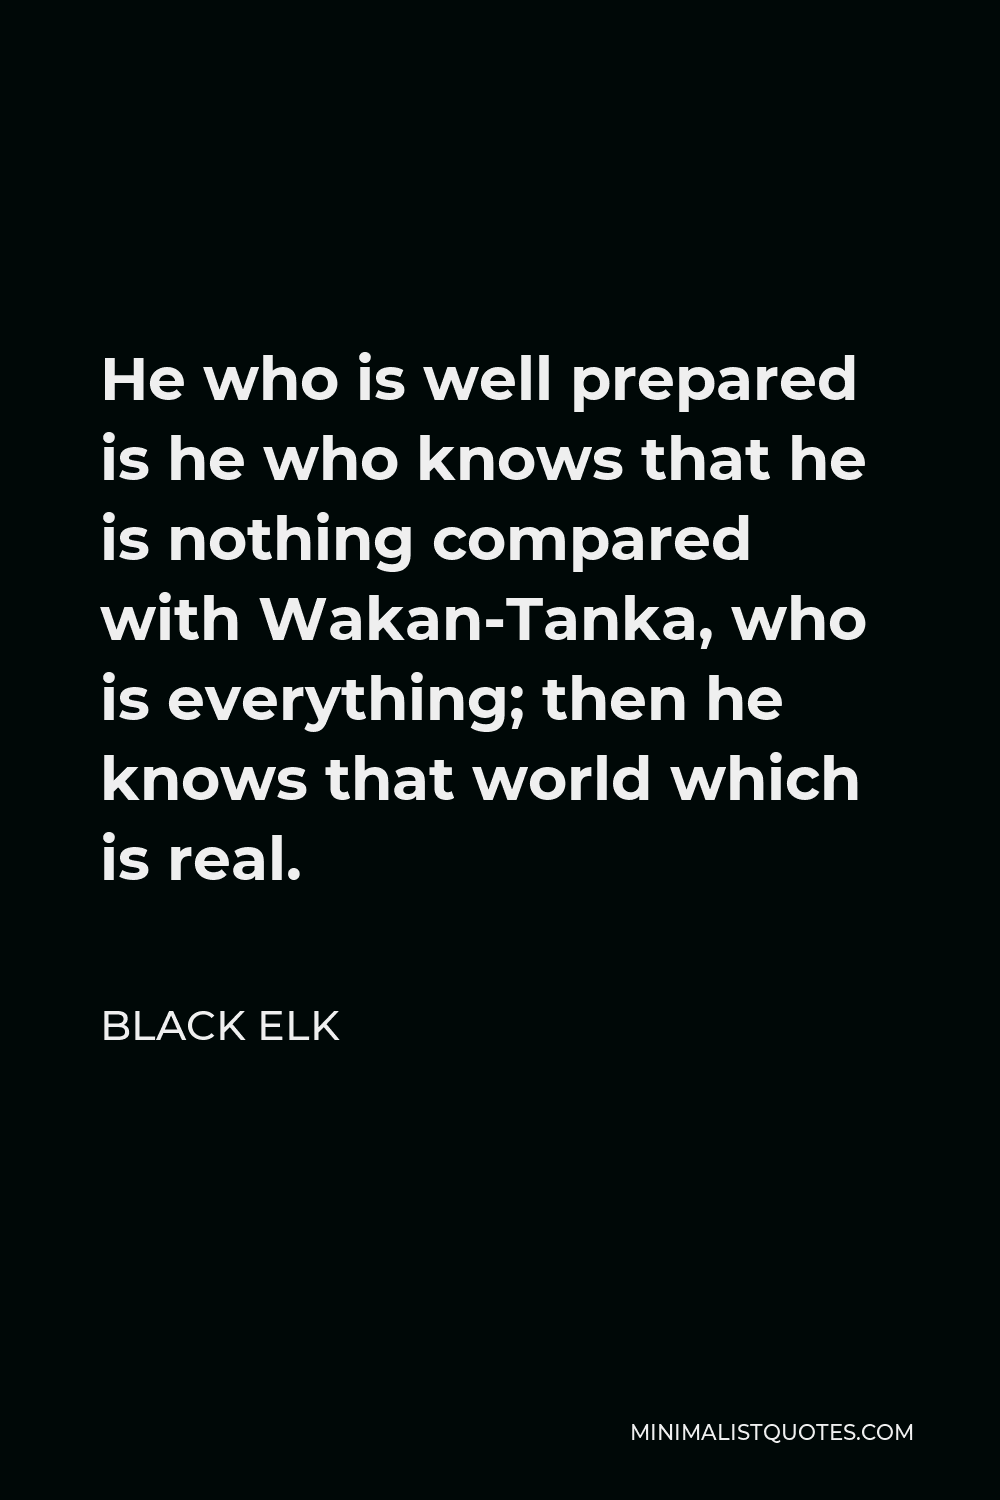 Black Elk Quote - He who is well prepared is he who knows that he is nothing compared with Wakan-Tanka, who is everything; then he knows that world which is real.